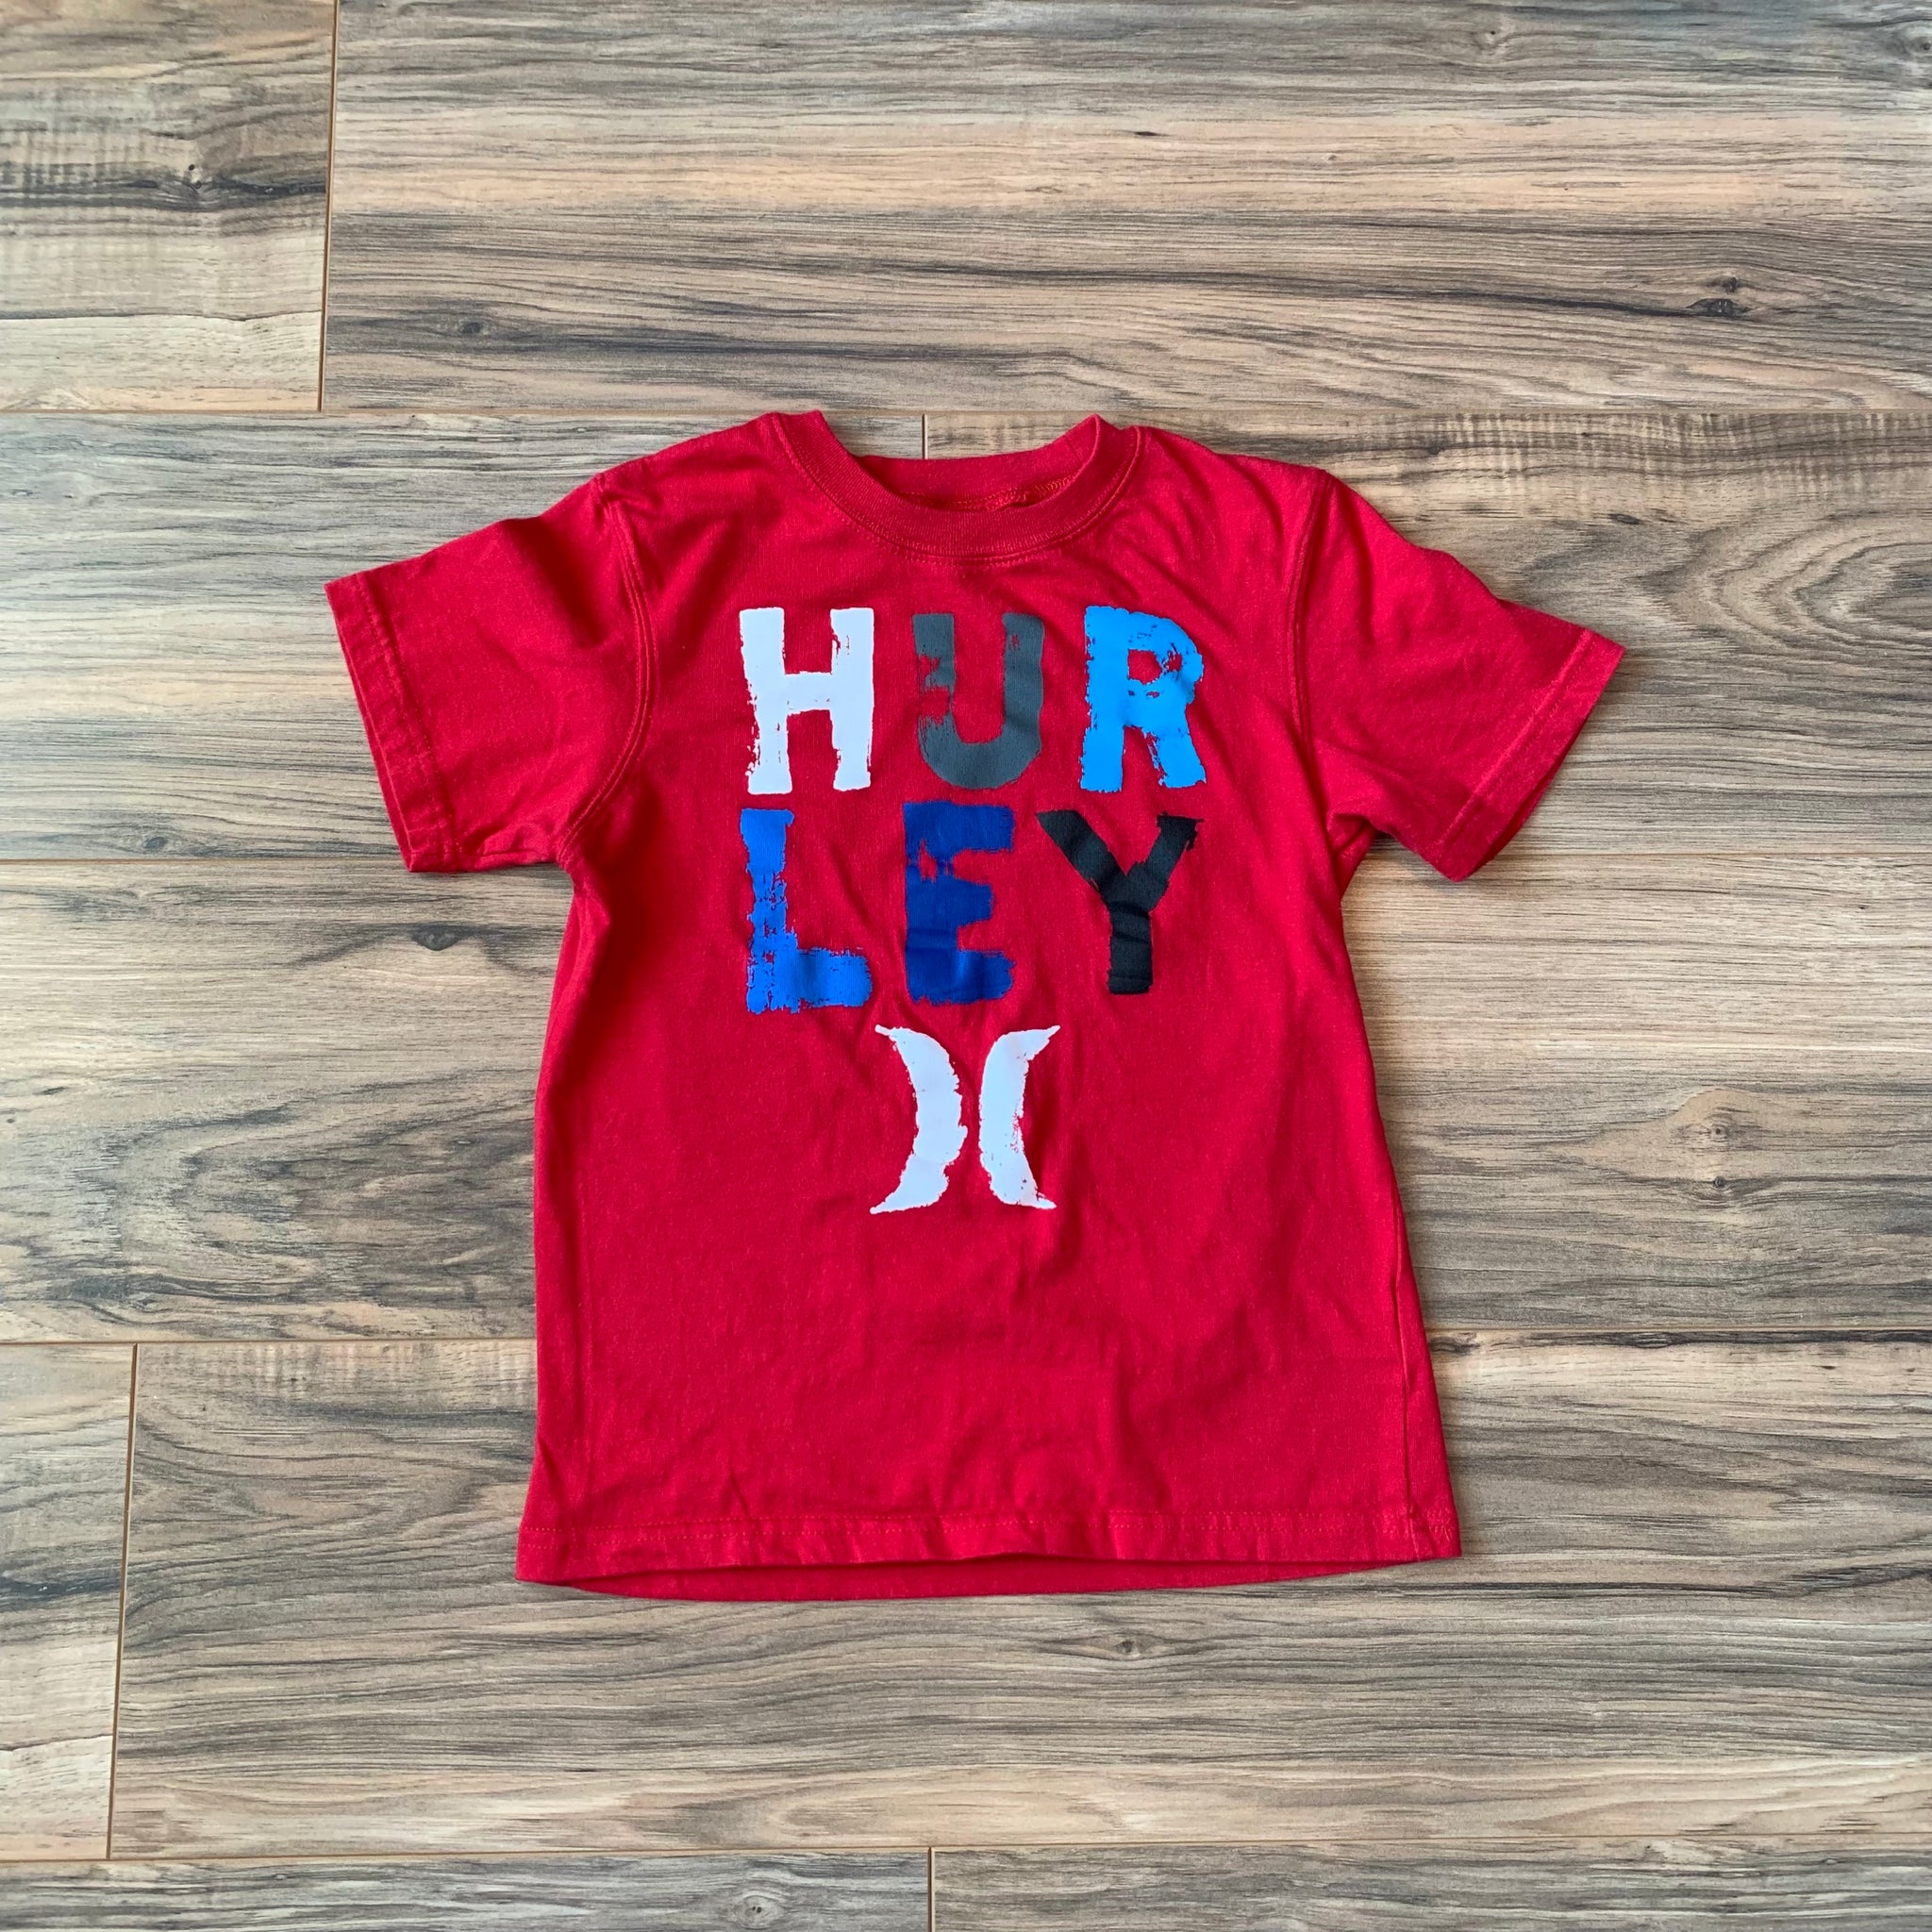 6x Hurley Red Graphic Short Sleeve T-Shirt